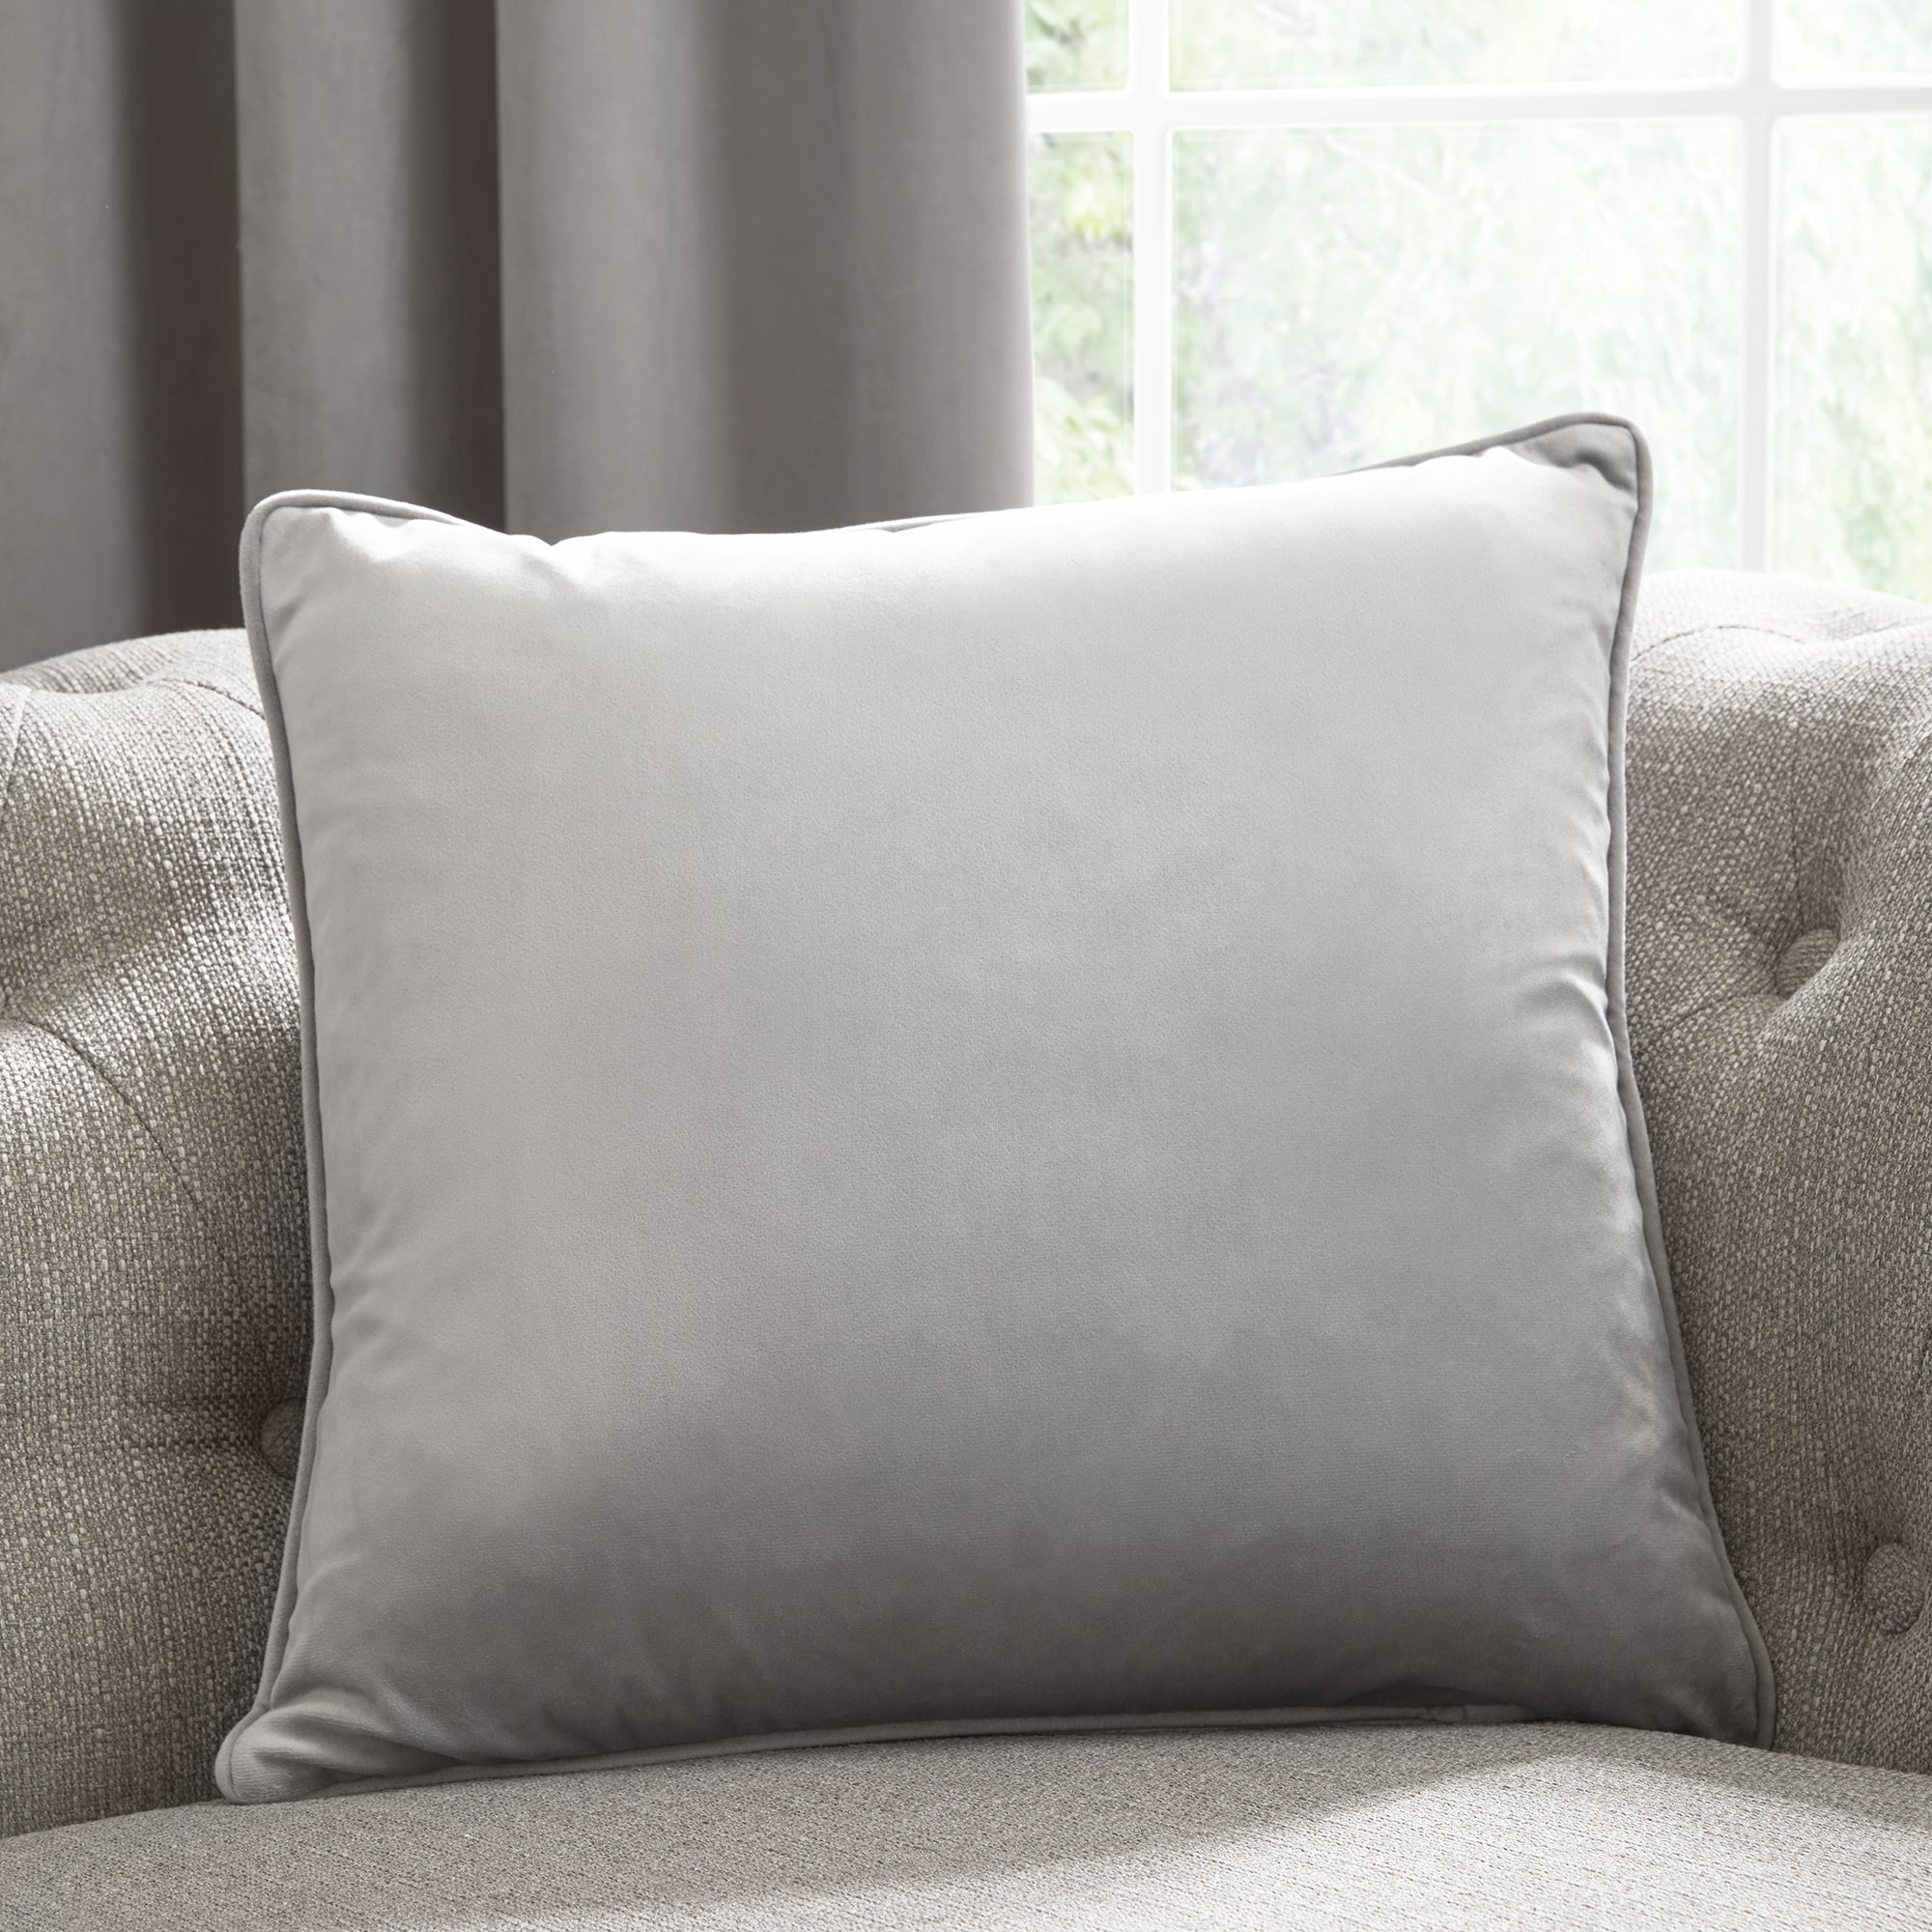 Montrose - Velvet Filled Cushion in Silver - by Laurence Llewelyn-Bowen